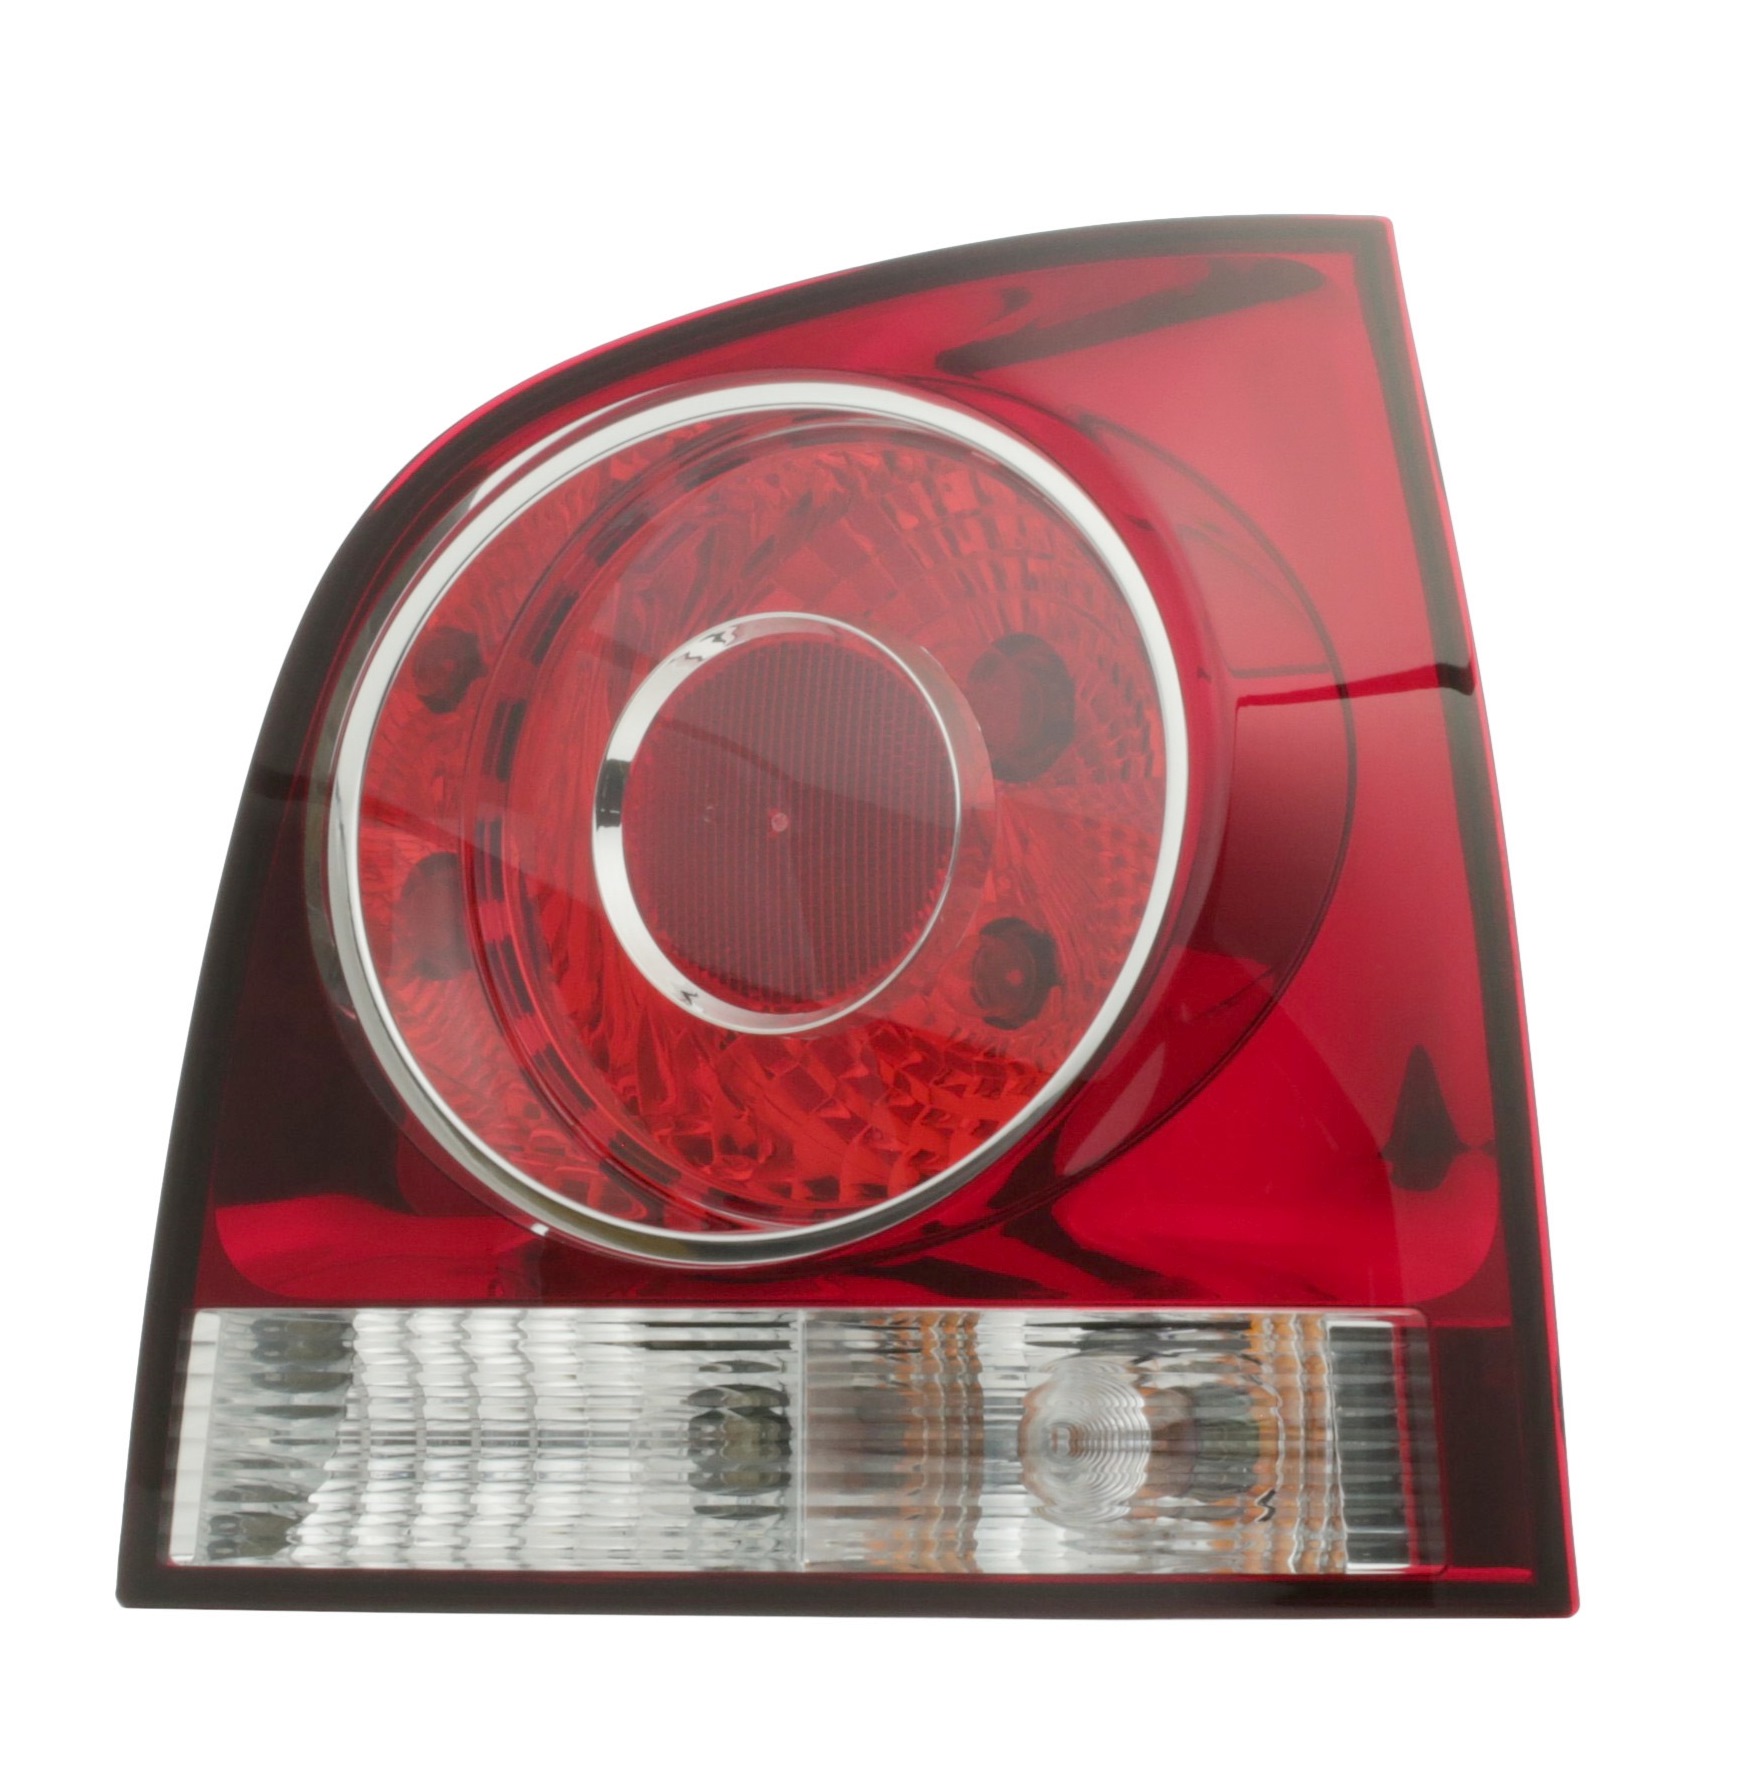 HELLA 2VP 965 303-081 Rear light Right, P21/4W, P21W, PY21W, R5W, 12V, Crystal clear, red, with bulbs, with bulb holder